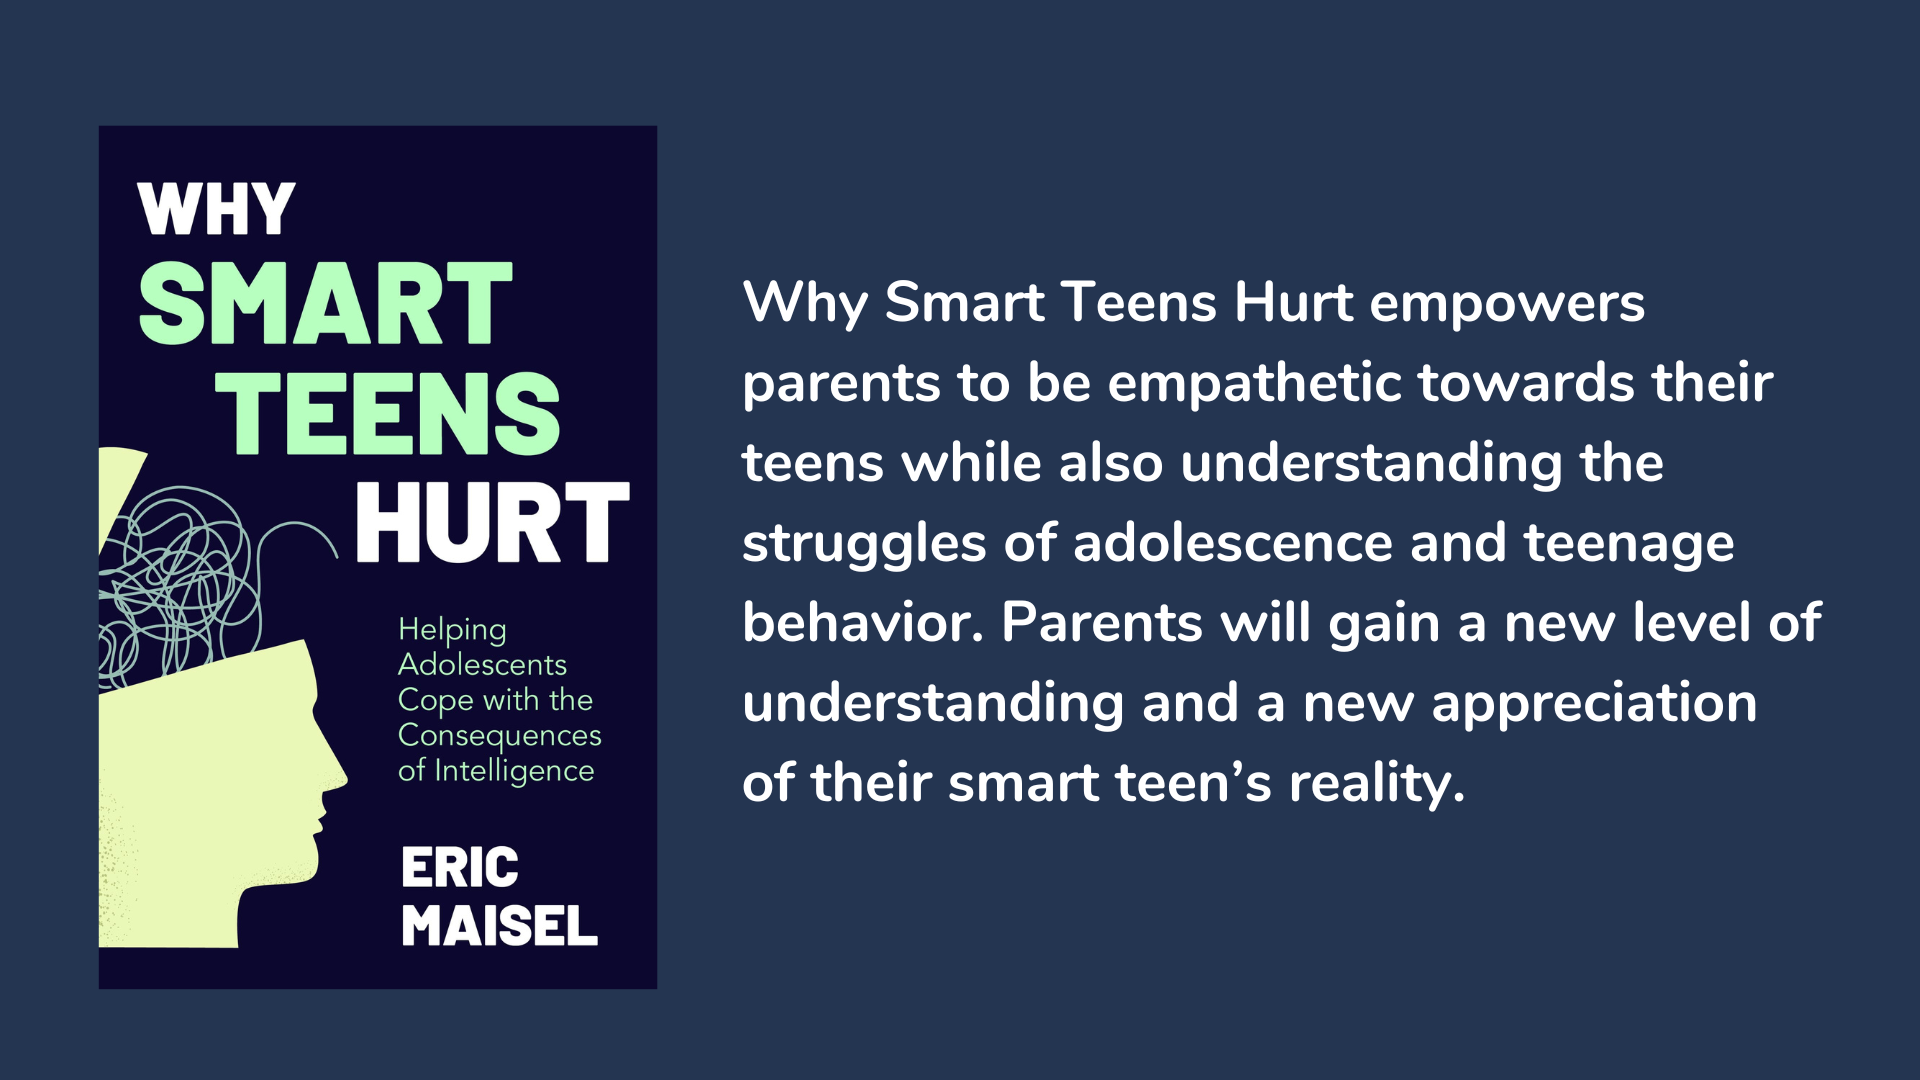 Why Smart Teens Hurt, book cover and description.